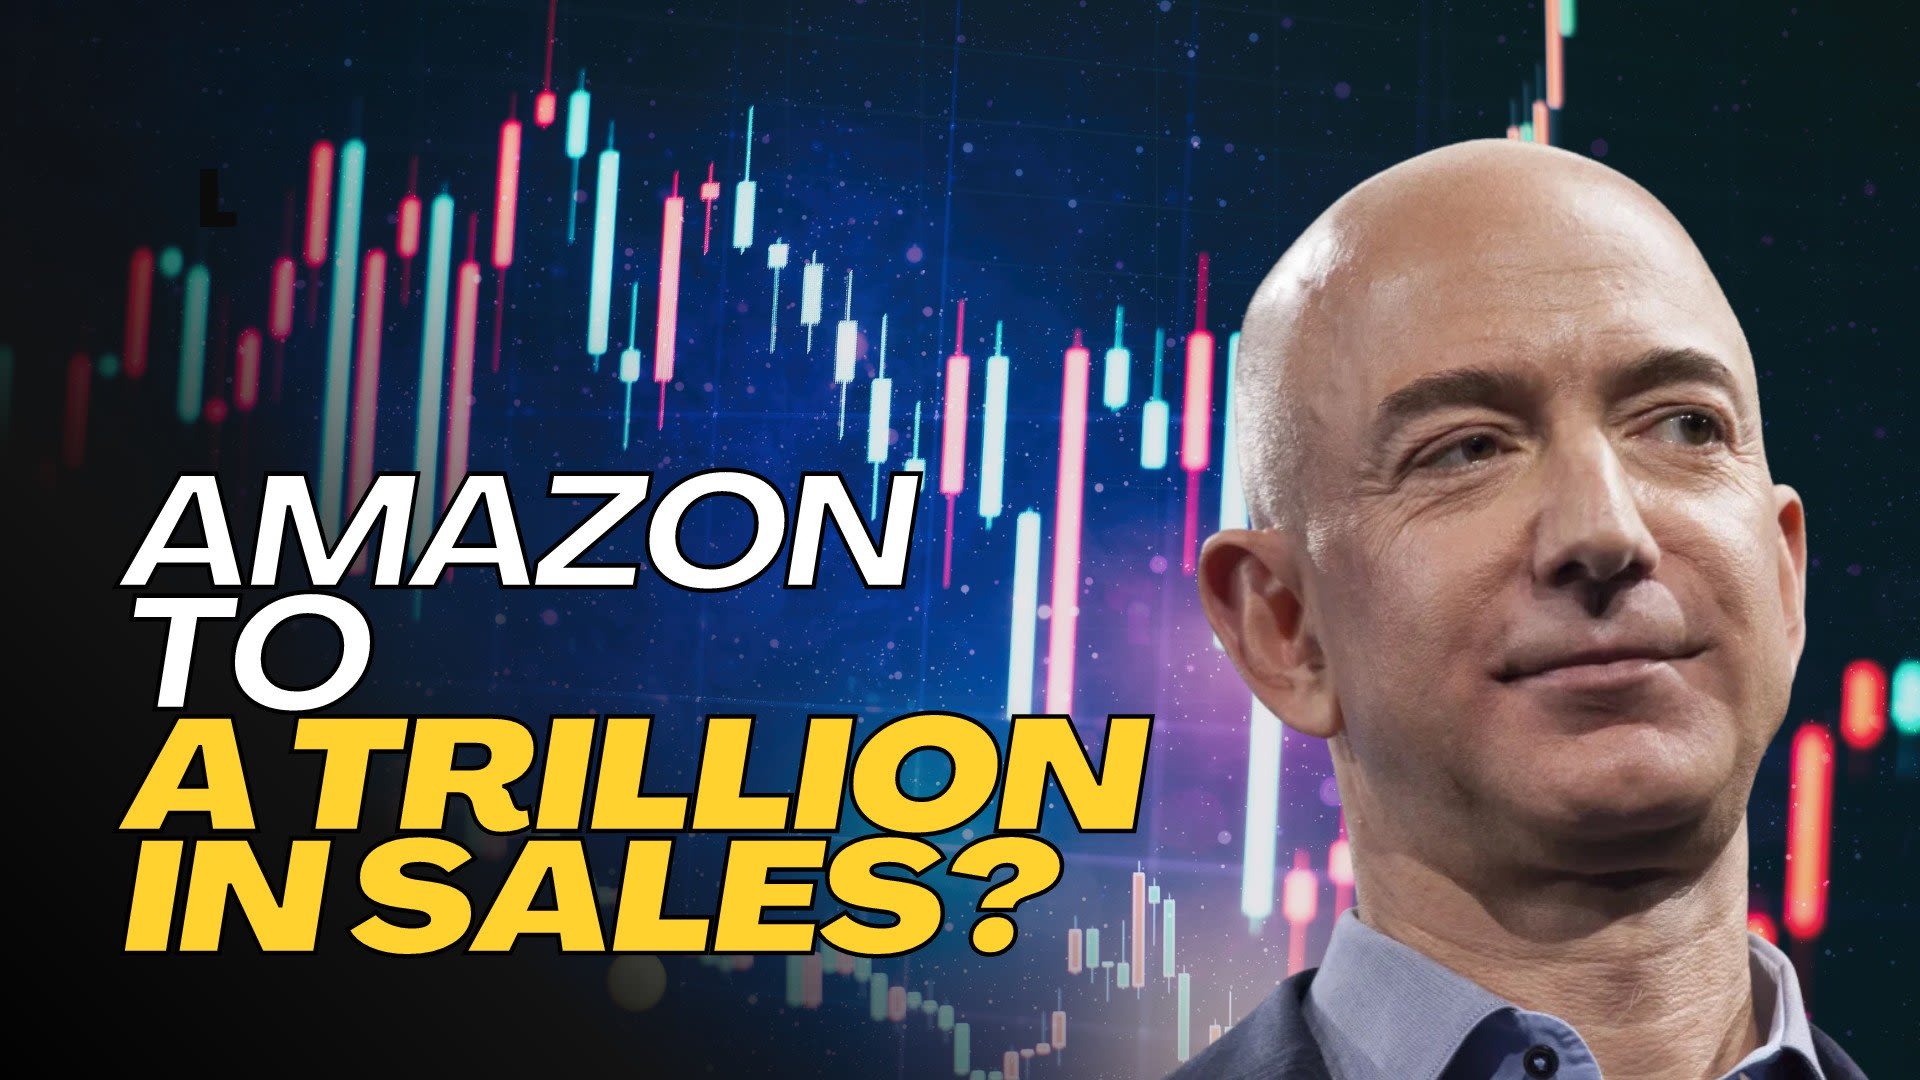 Will Amazon Be the First Company to Hit a Trillion Dollars In Sales?